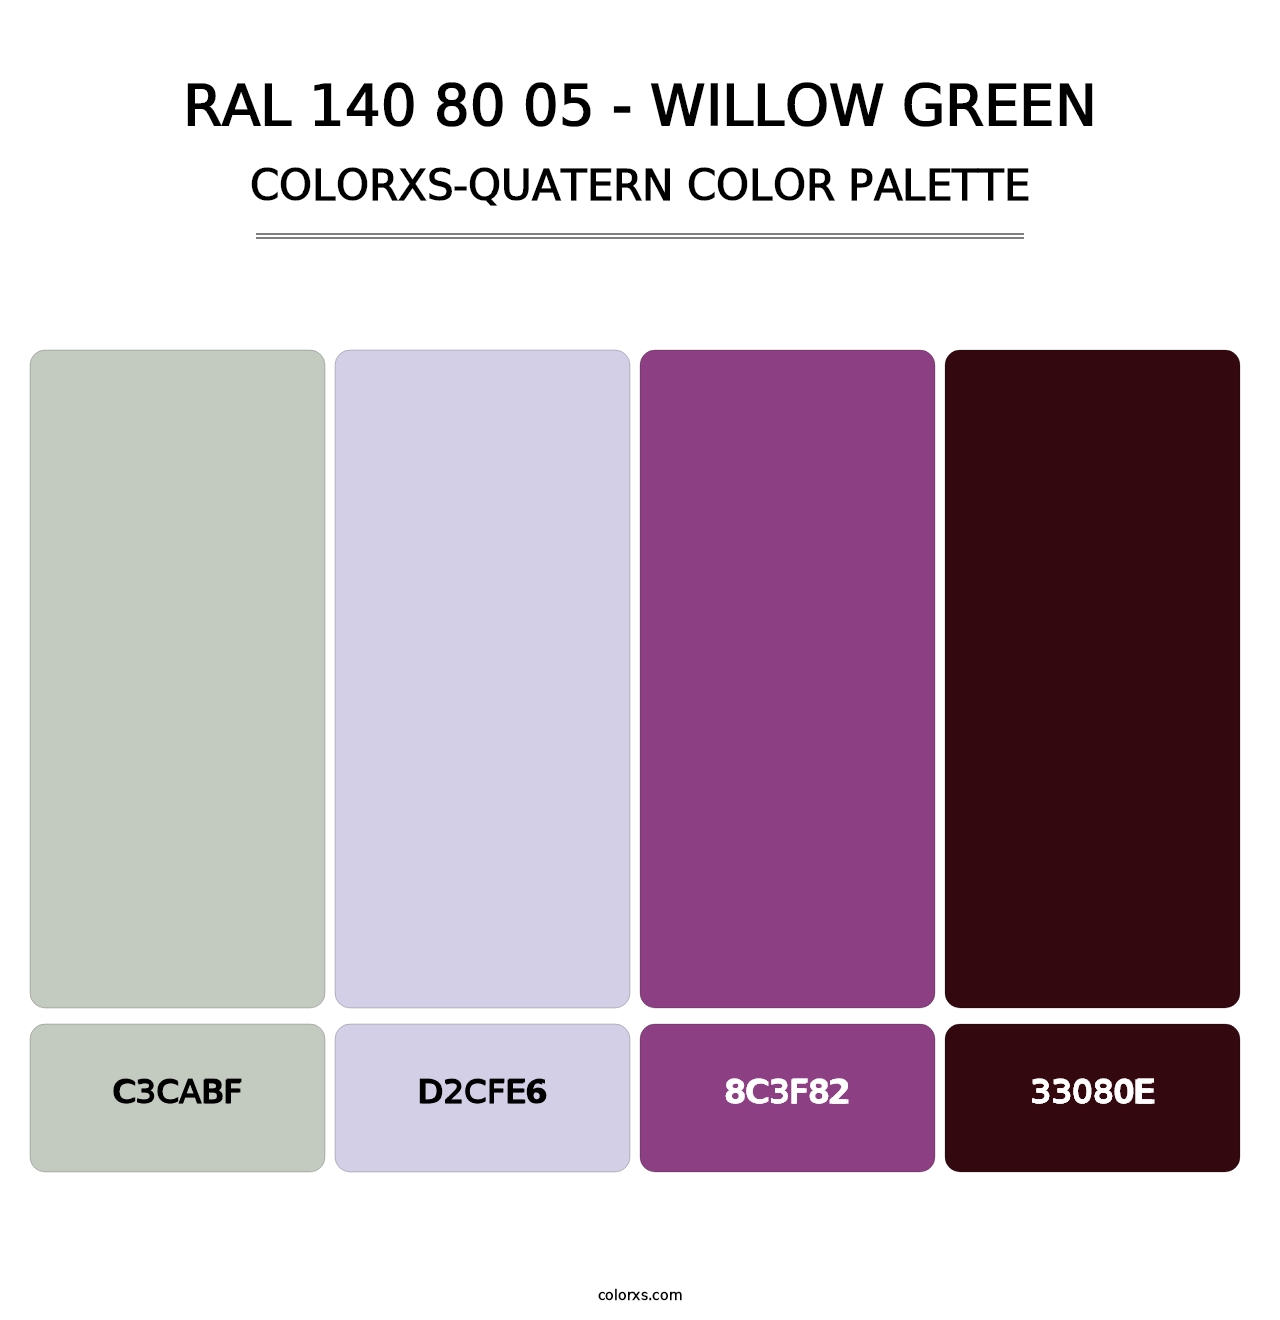 RAL 140 80 05 - Willow Green - Colorxs Quatern Palette